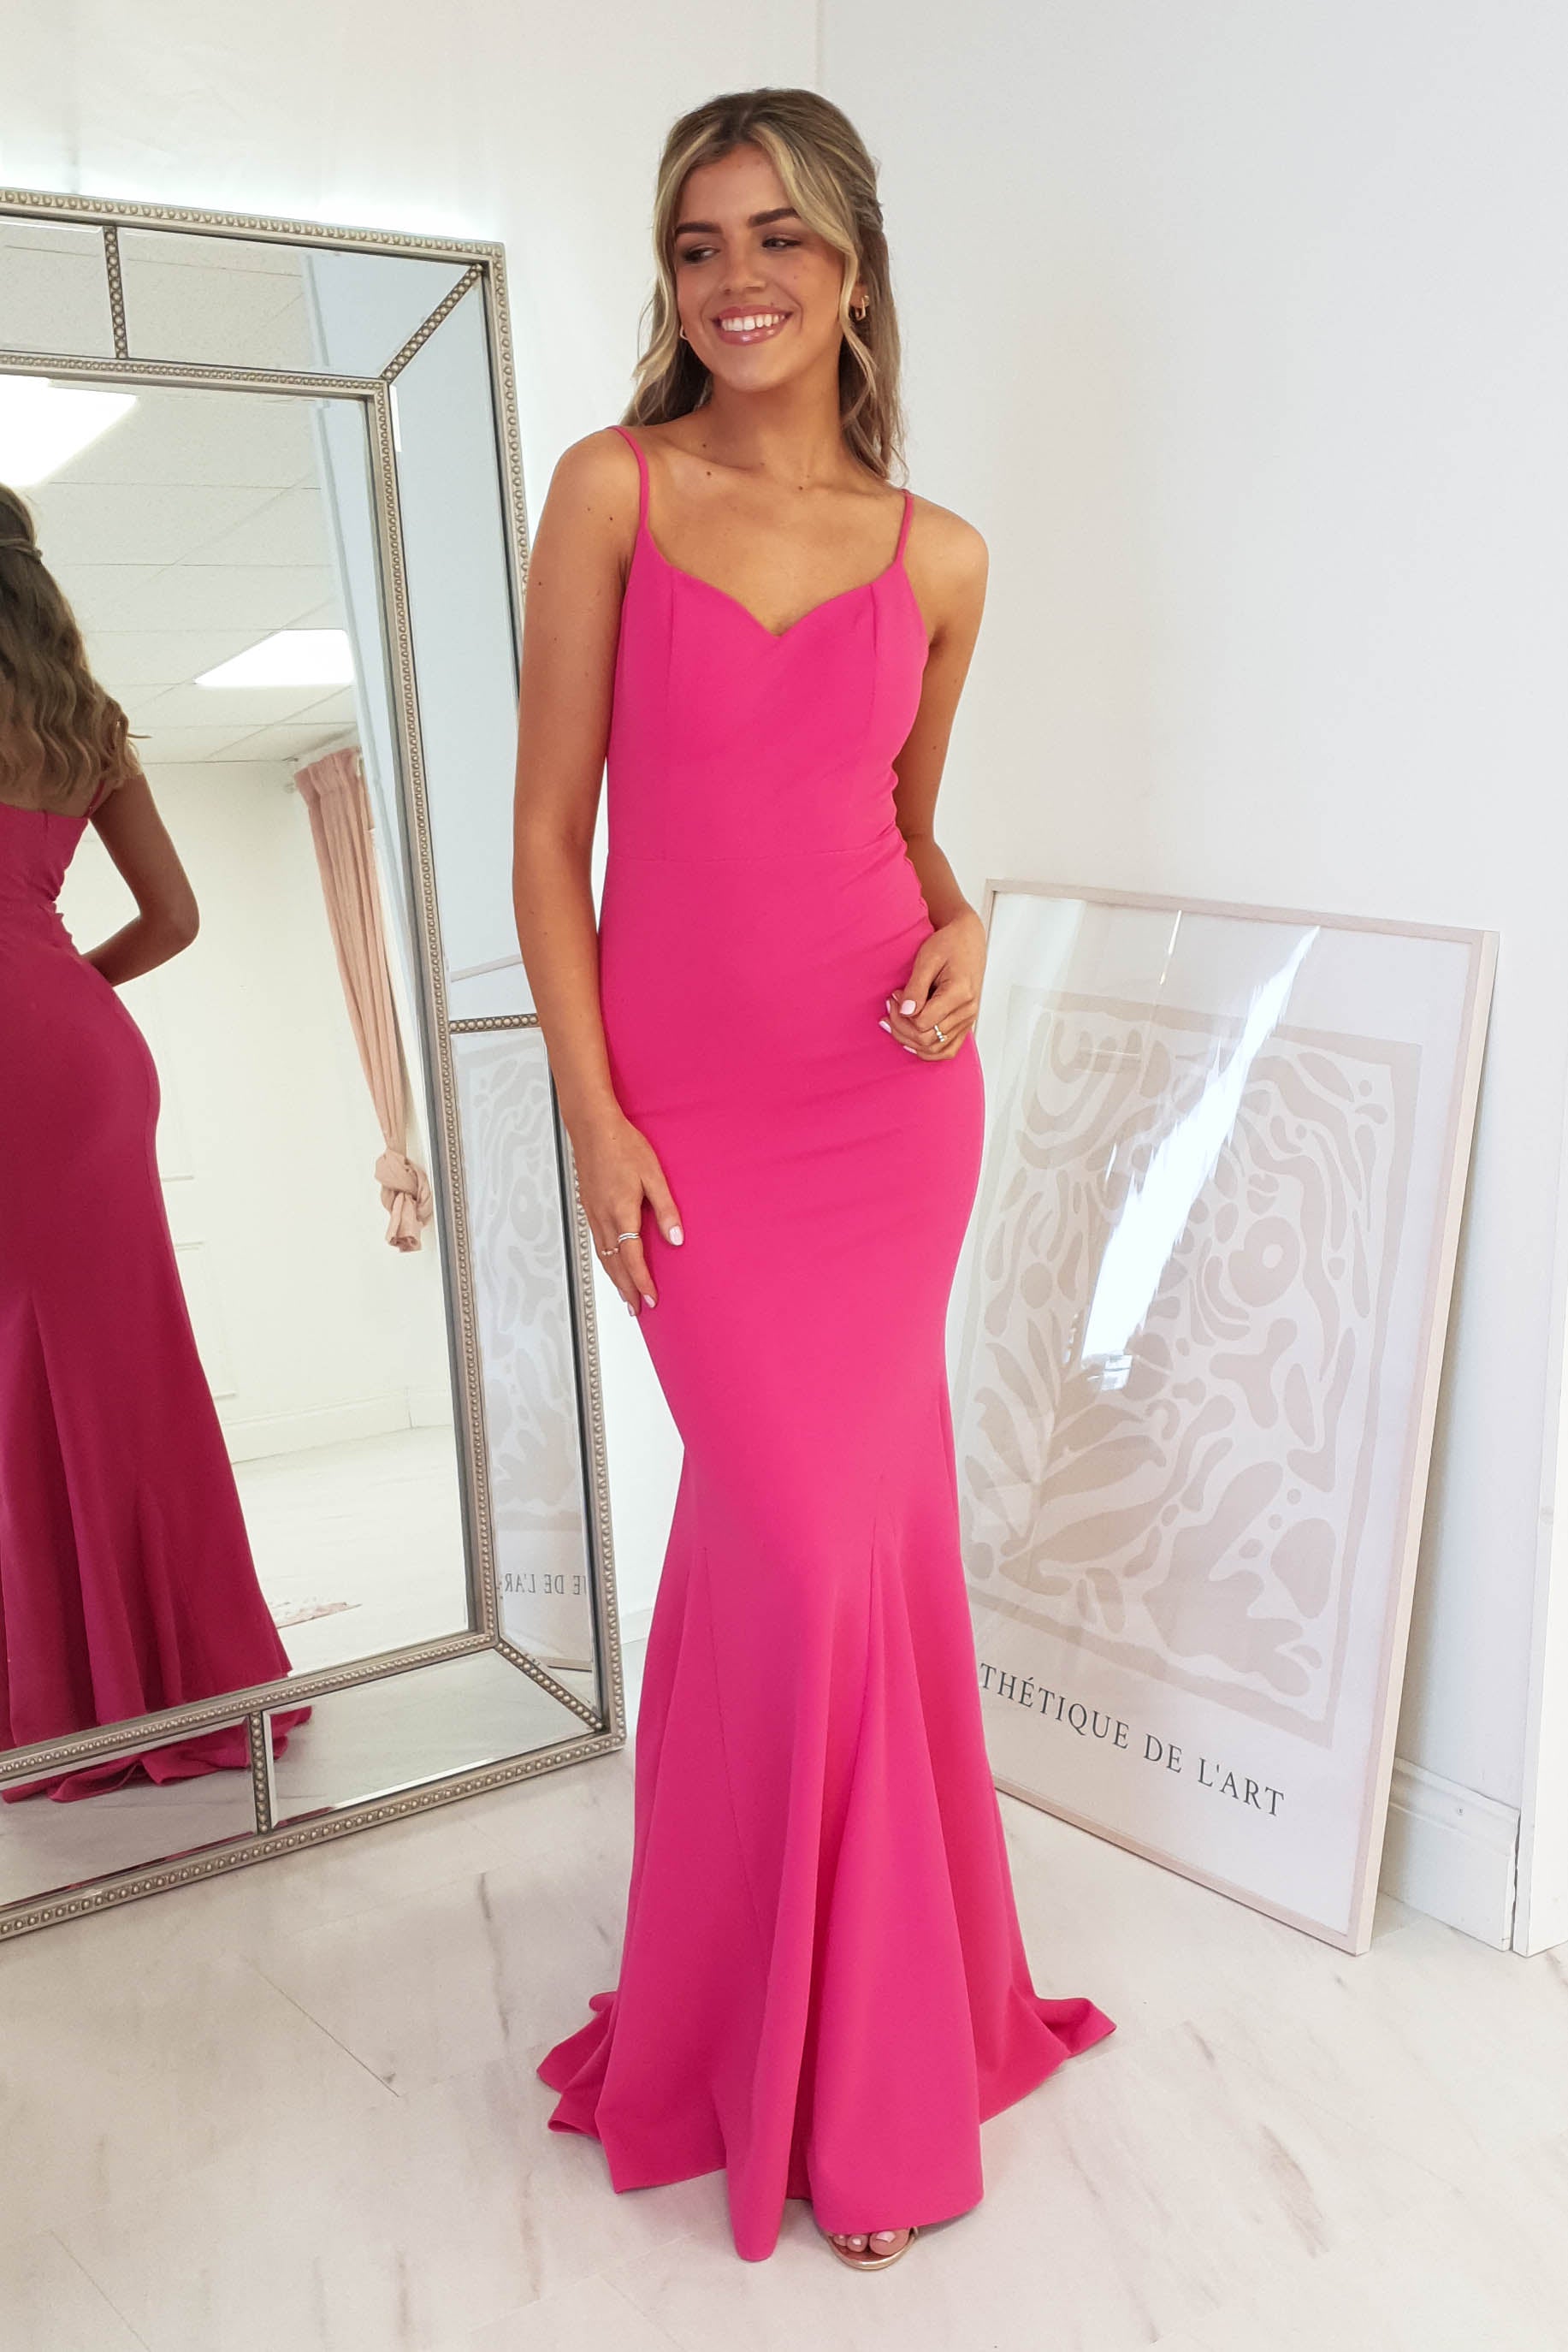 done-12767-2-hot-pink-gown-with-built-in-cups-fuchsia-vera-lucy-dresses-48968056275285.jpg